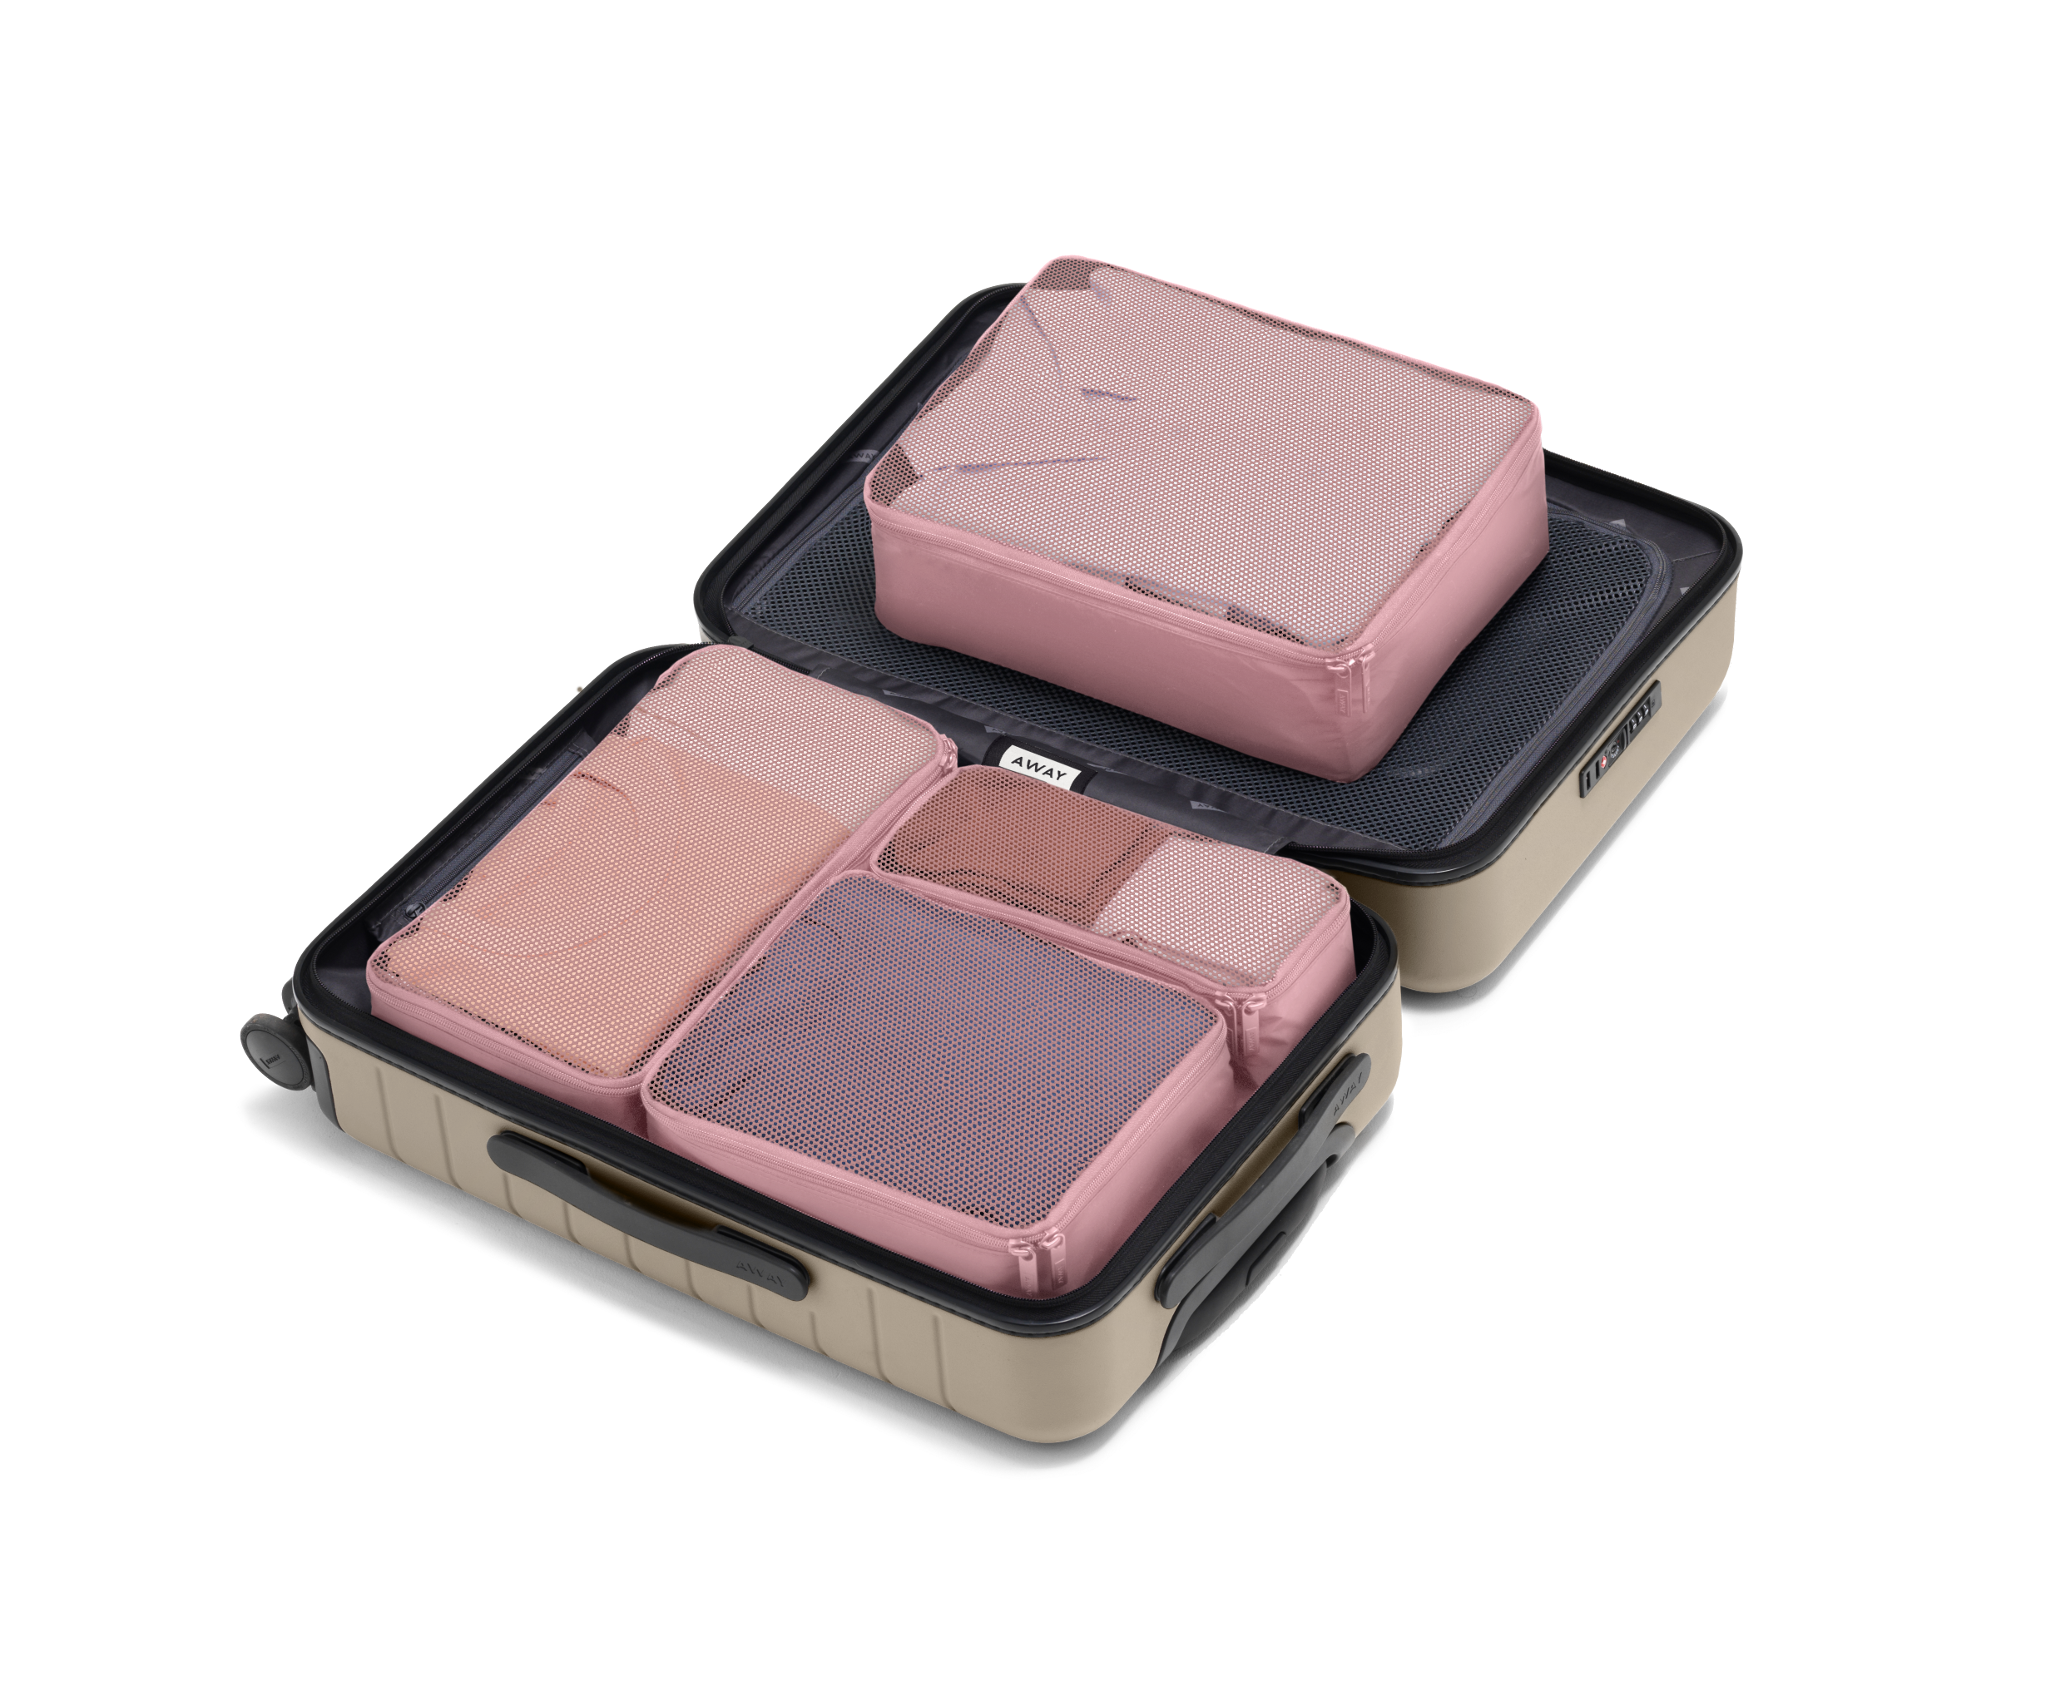 Thrill blush pink packing cubes filled with clothes in muted colors fill a beige Away hard-side carry-on size suitcase against a white background.